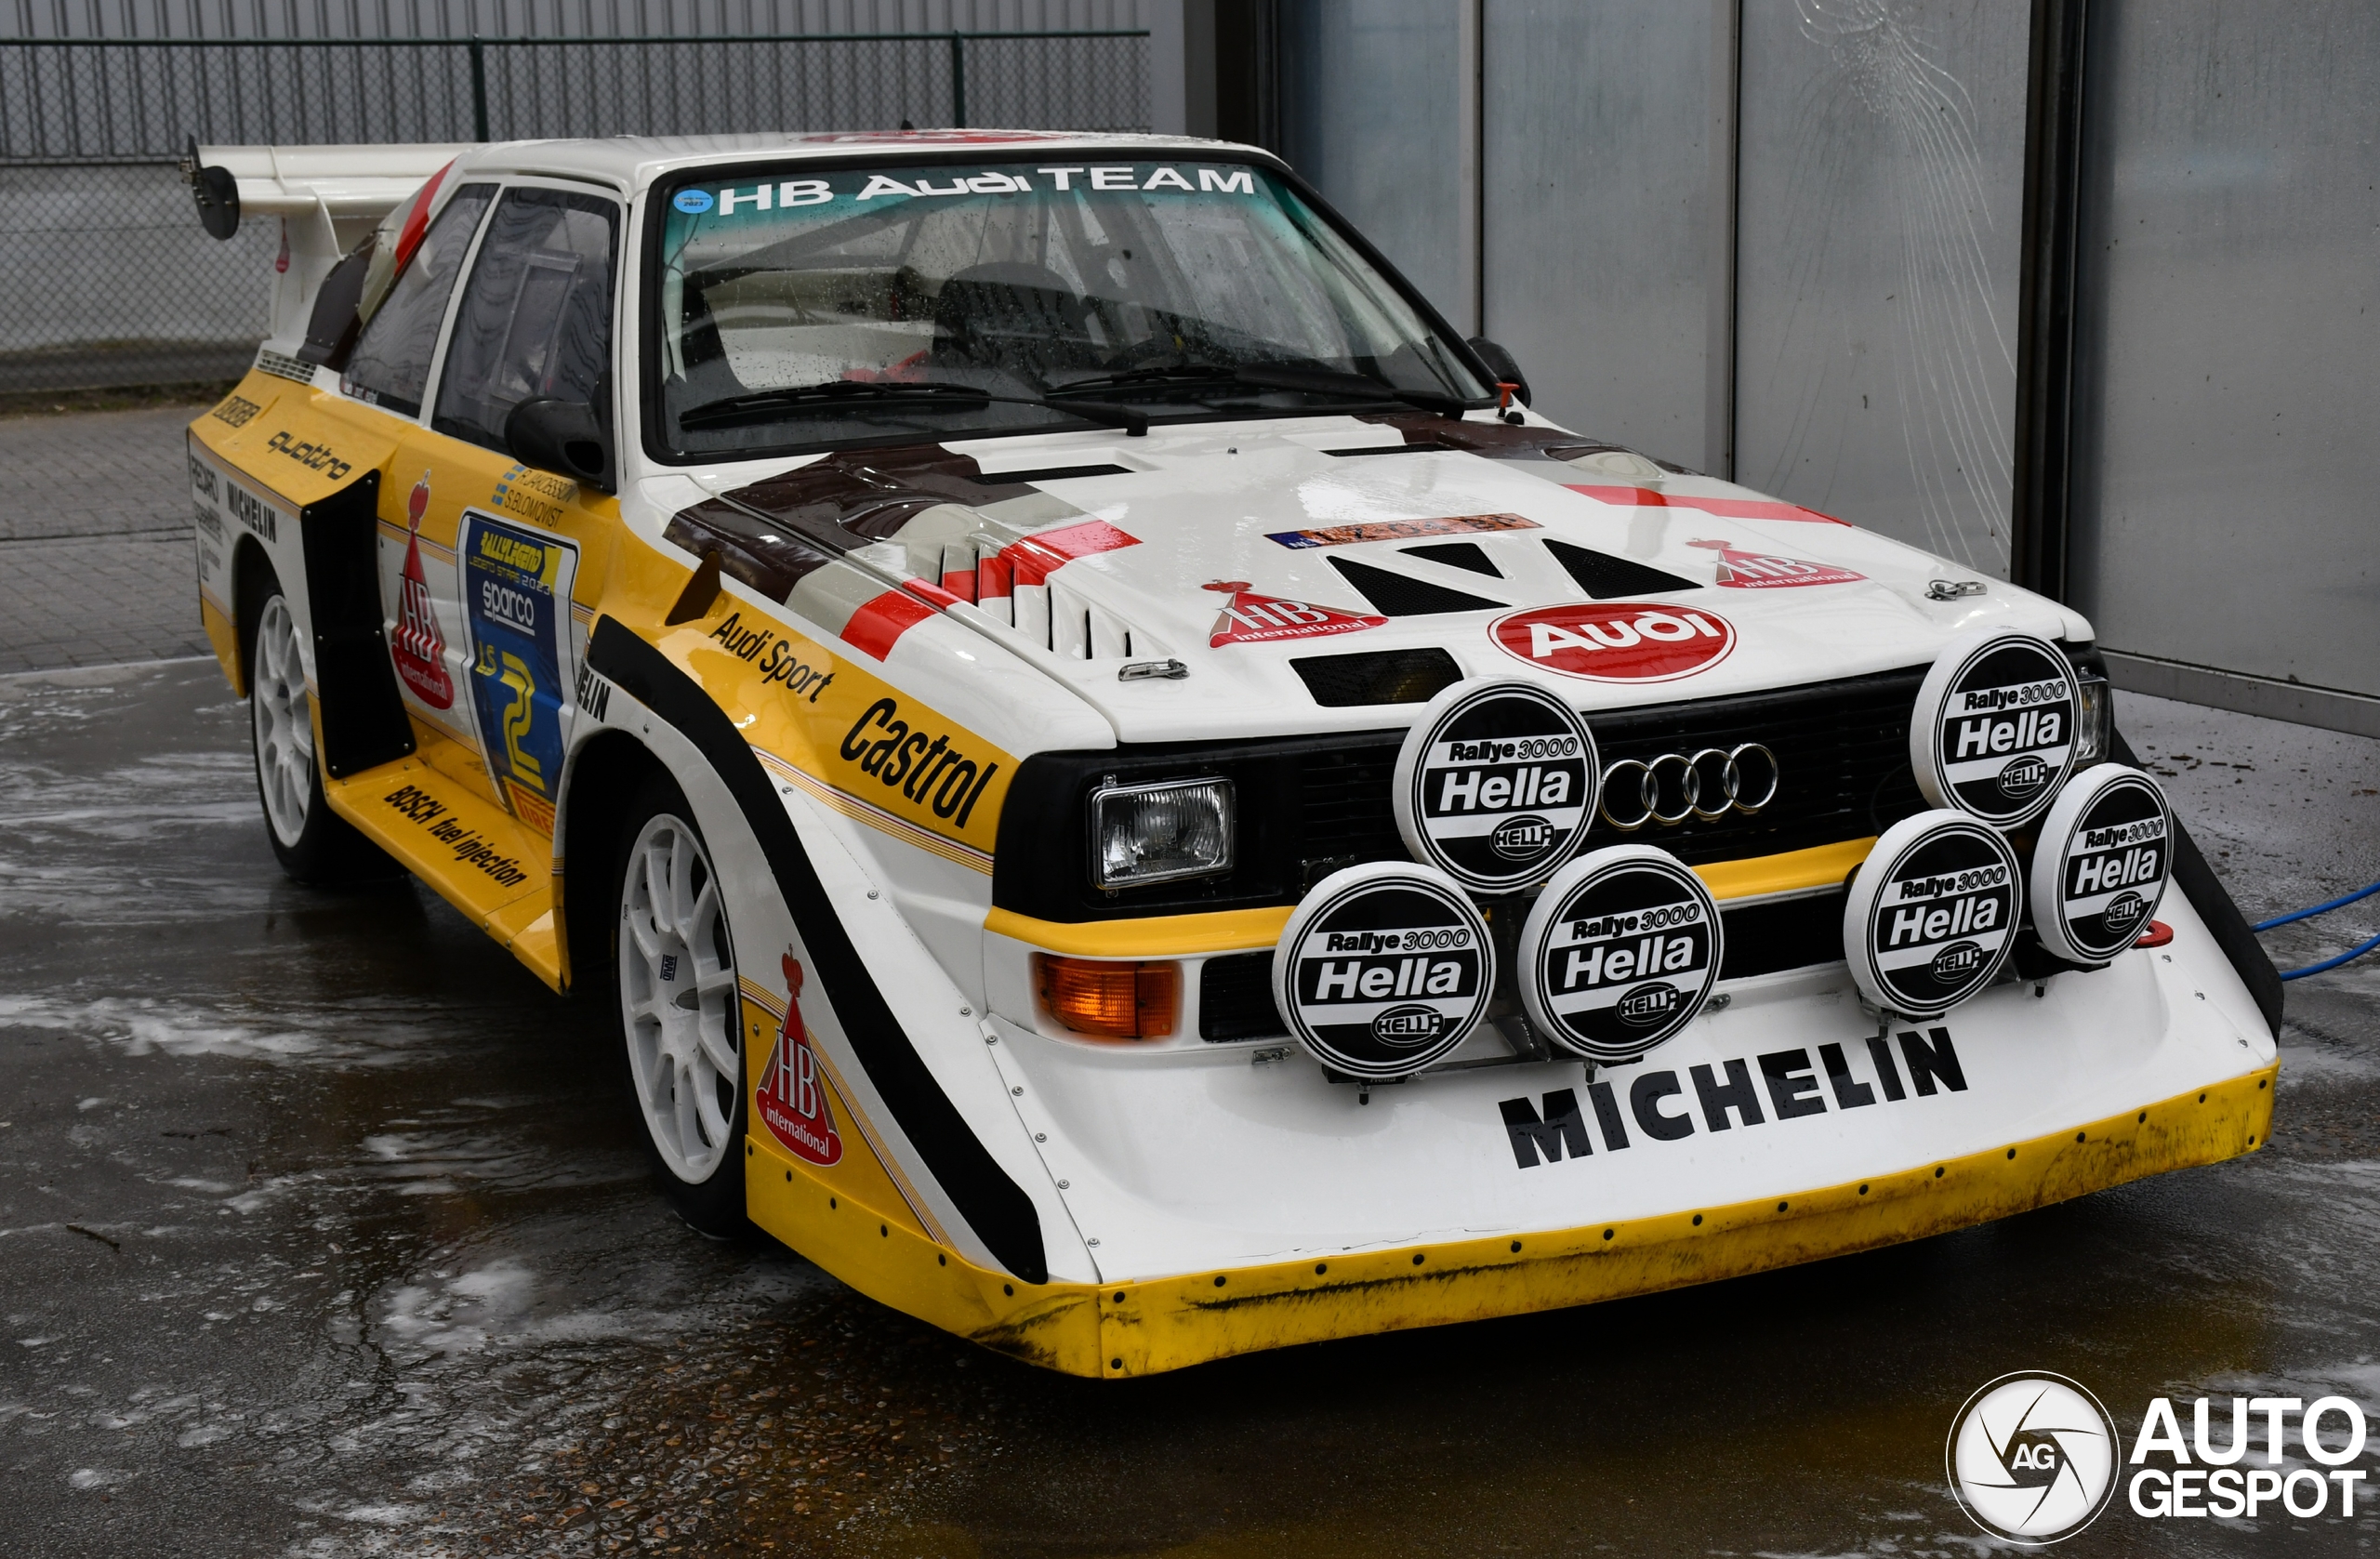 The legendary Sport Quattro S1 shows up in the Netherlands